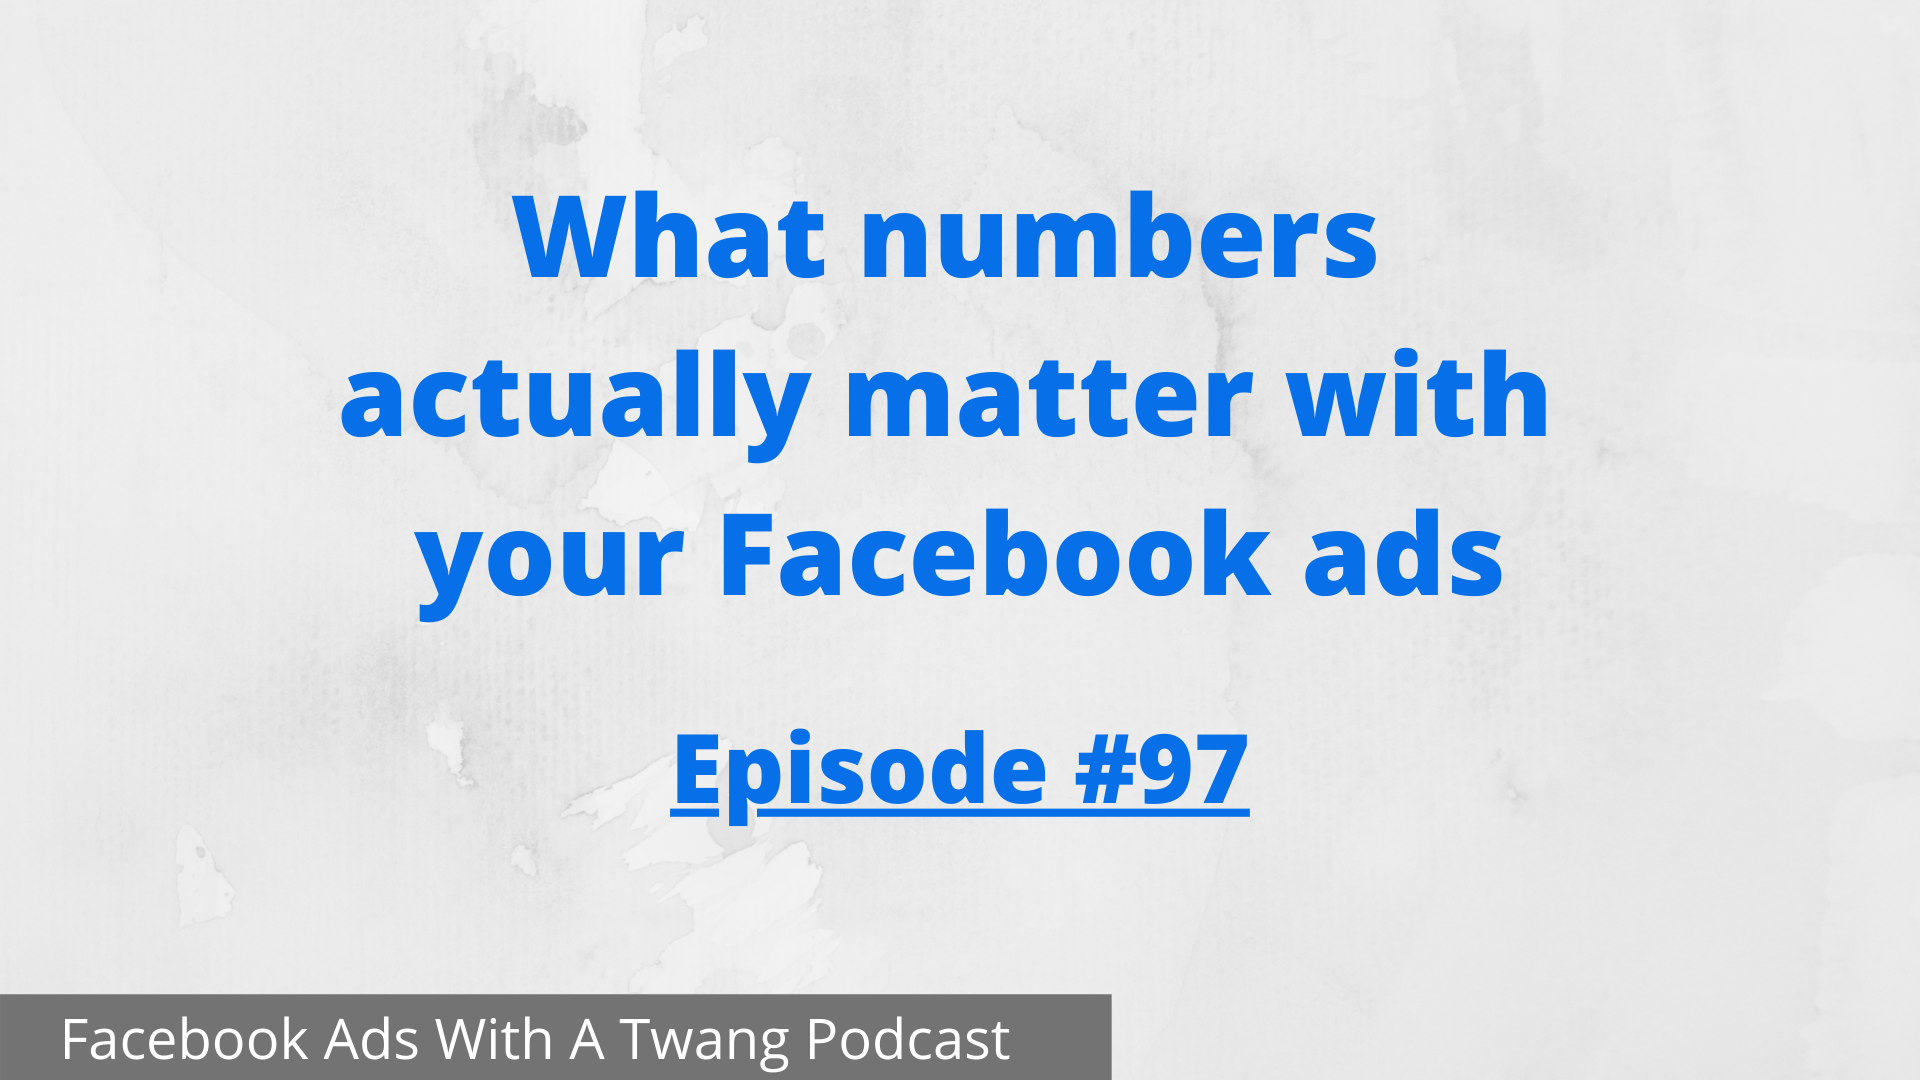 What numbers actually matter with your Facebook ads